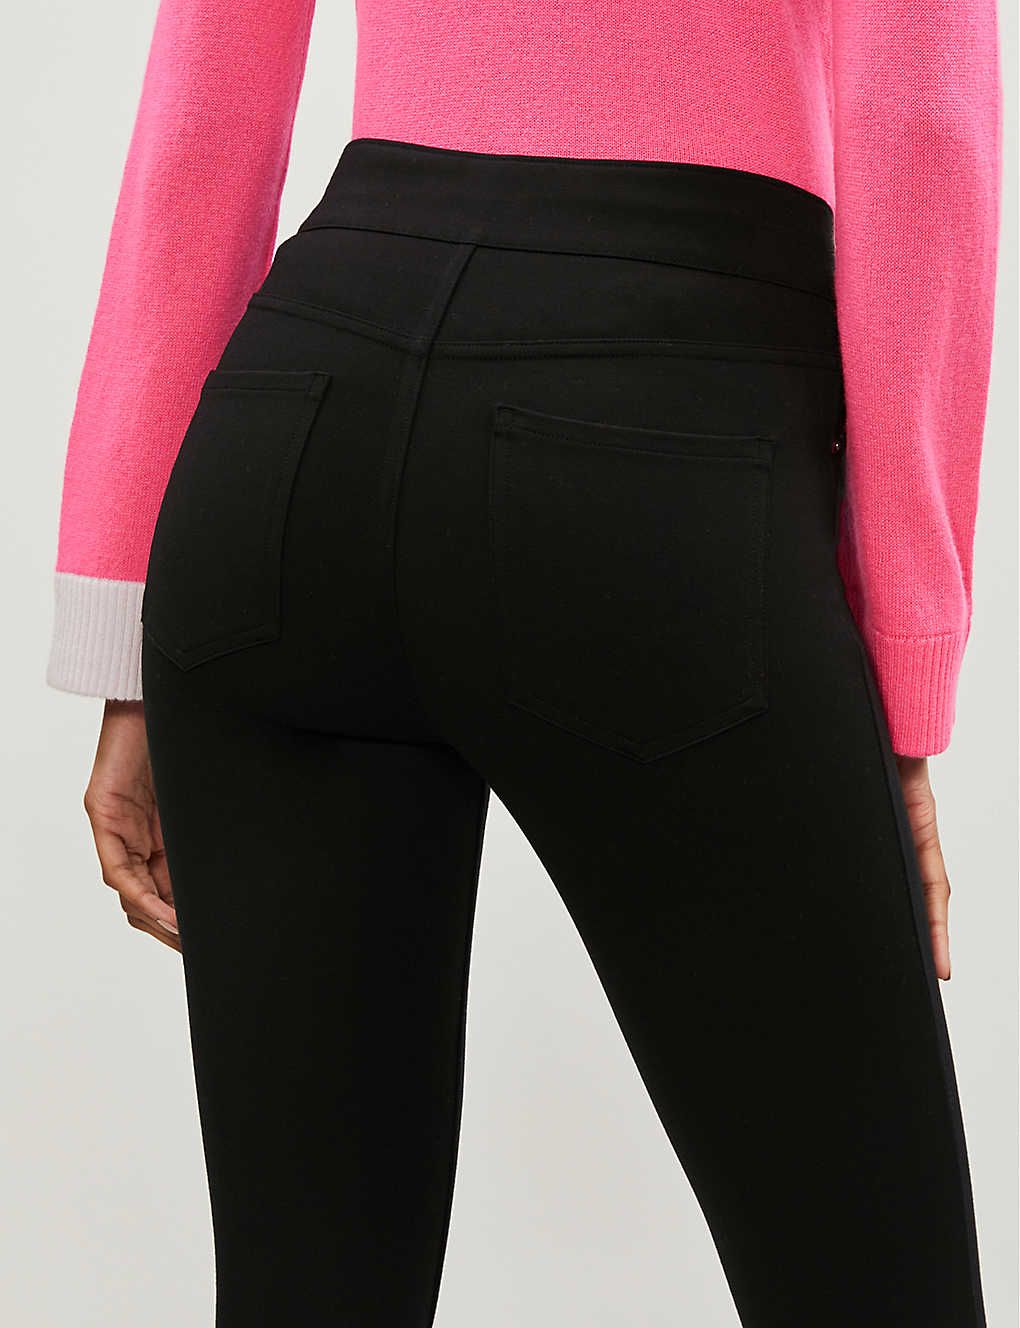 The Butt-Flattering Pants I Wear Non-Stop Are $84 at Spanx